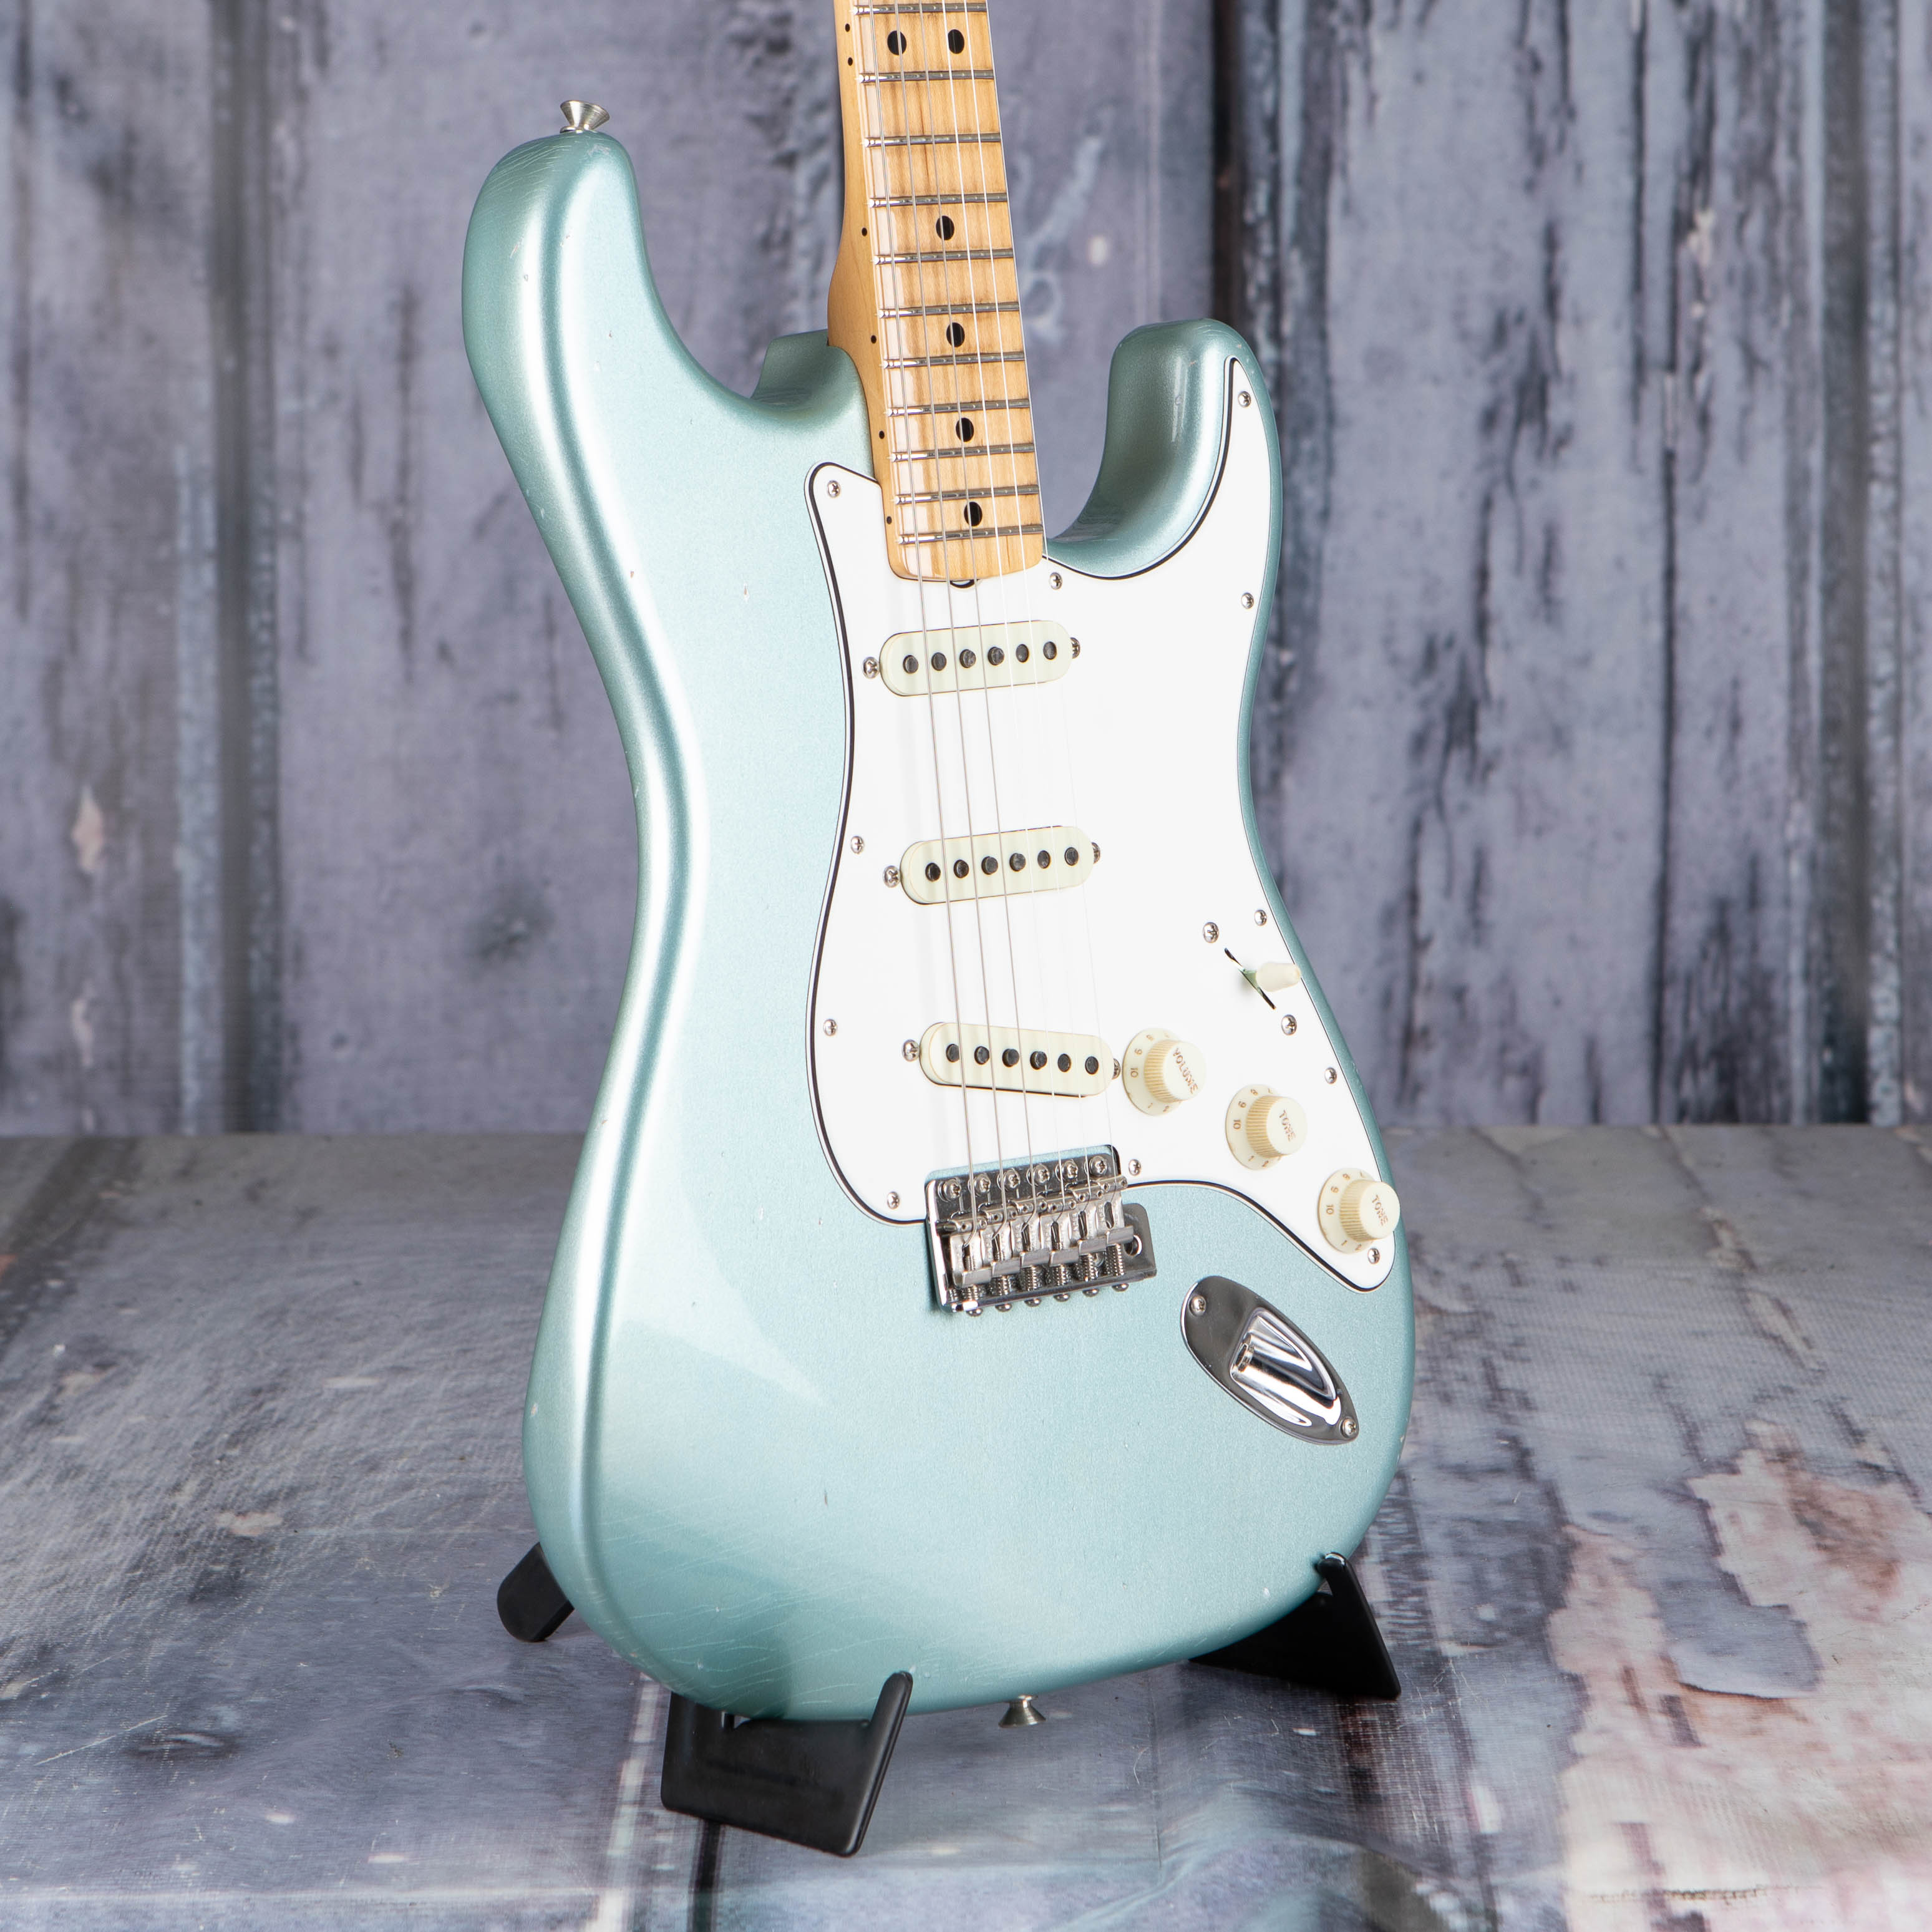 Fender Custom Shop 1969 Stratocaster Journeyman Relic Closet Classic Electric Guitar, Aged Fire Mist Silver, angle